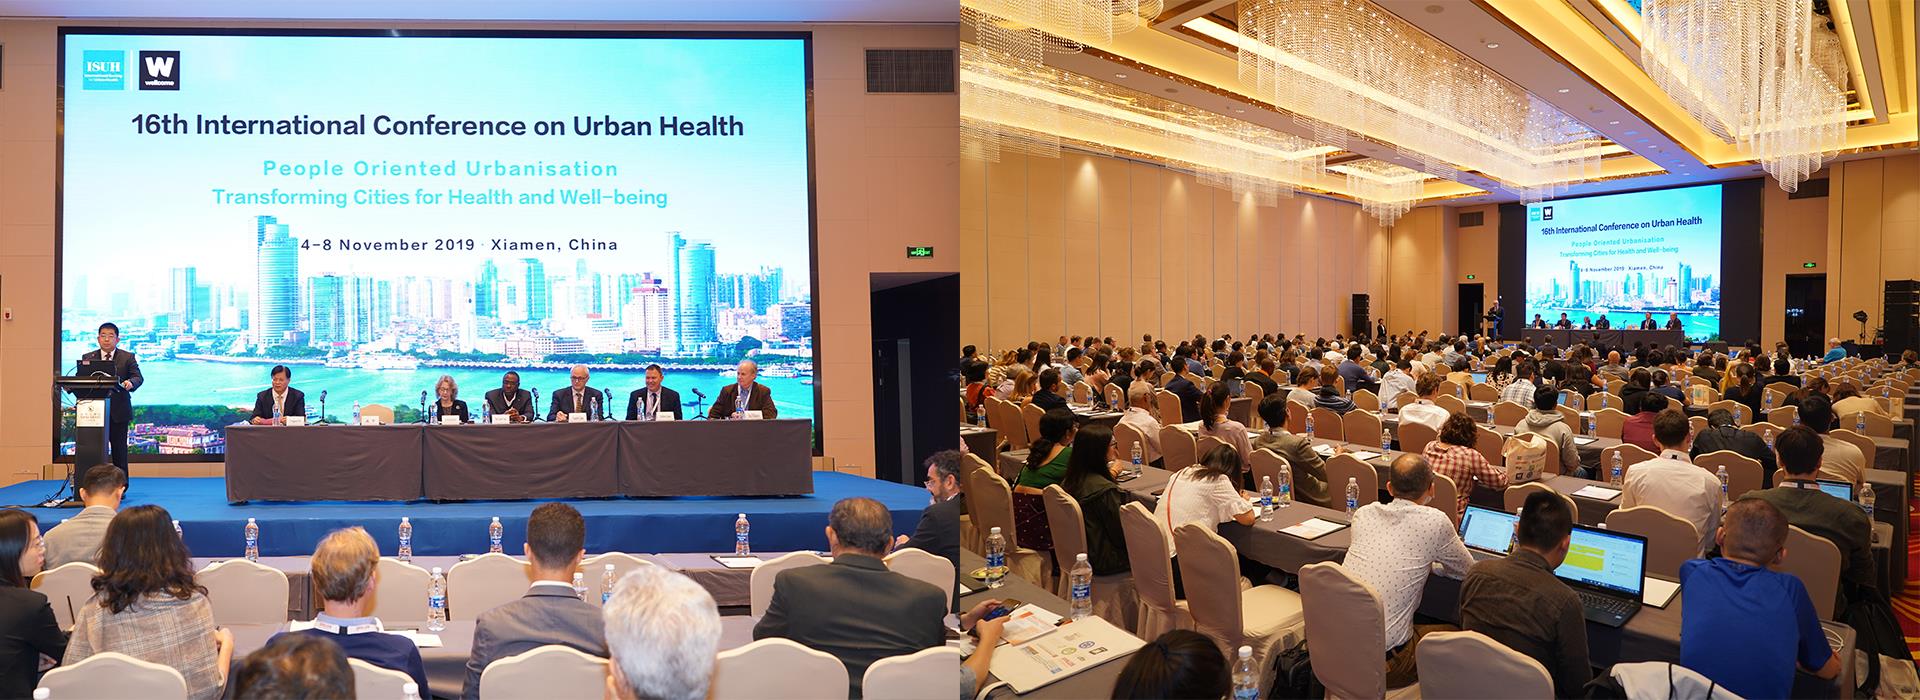 The 16th International Conference on Urban Health was Held in Xiamen 